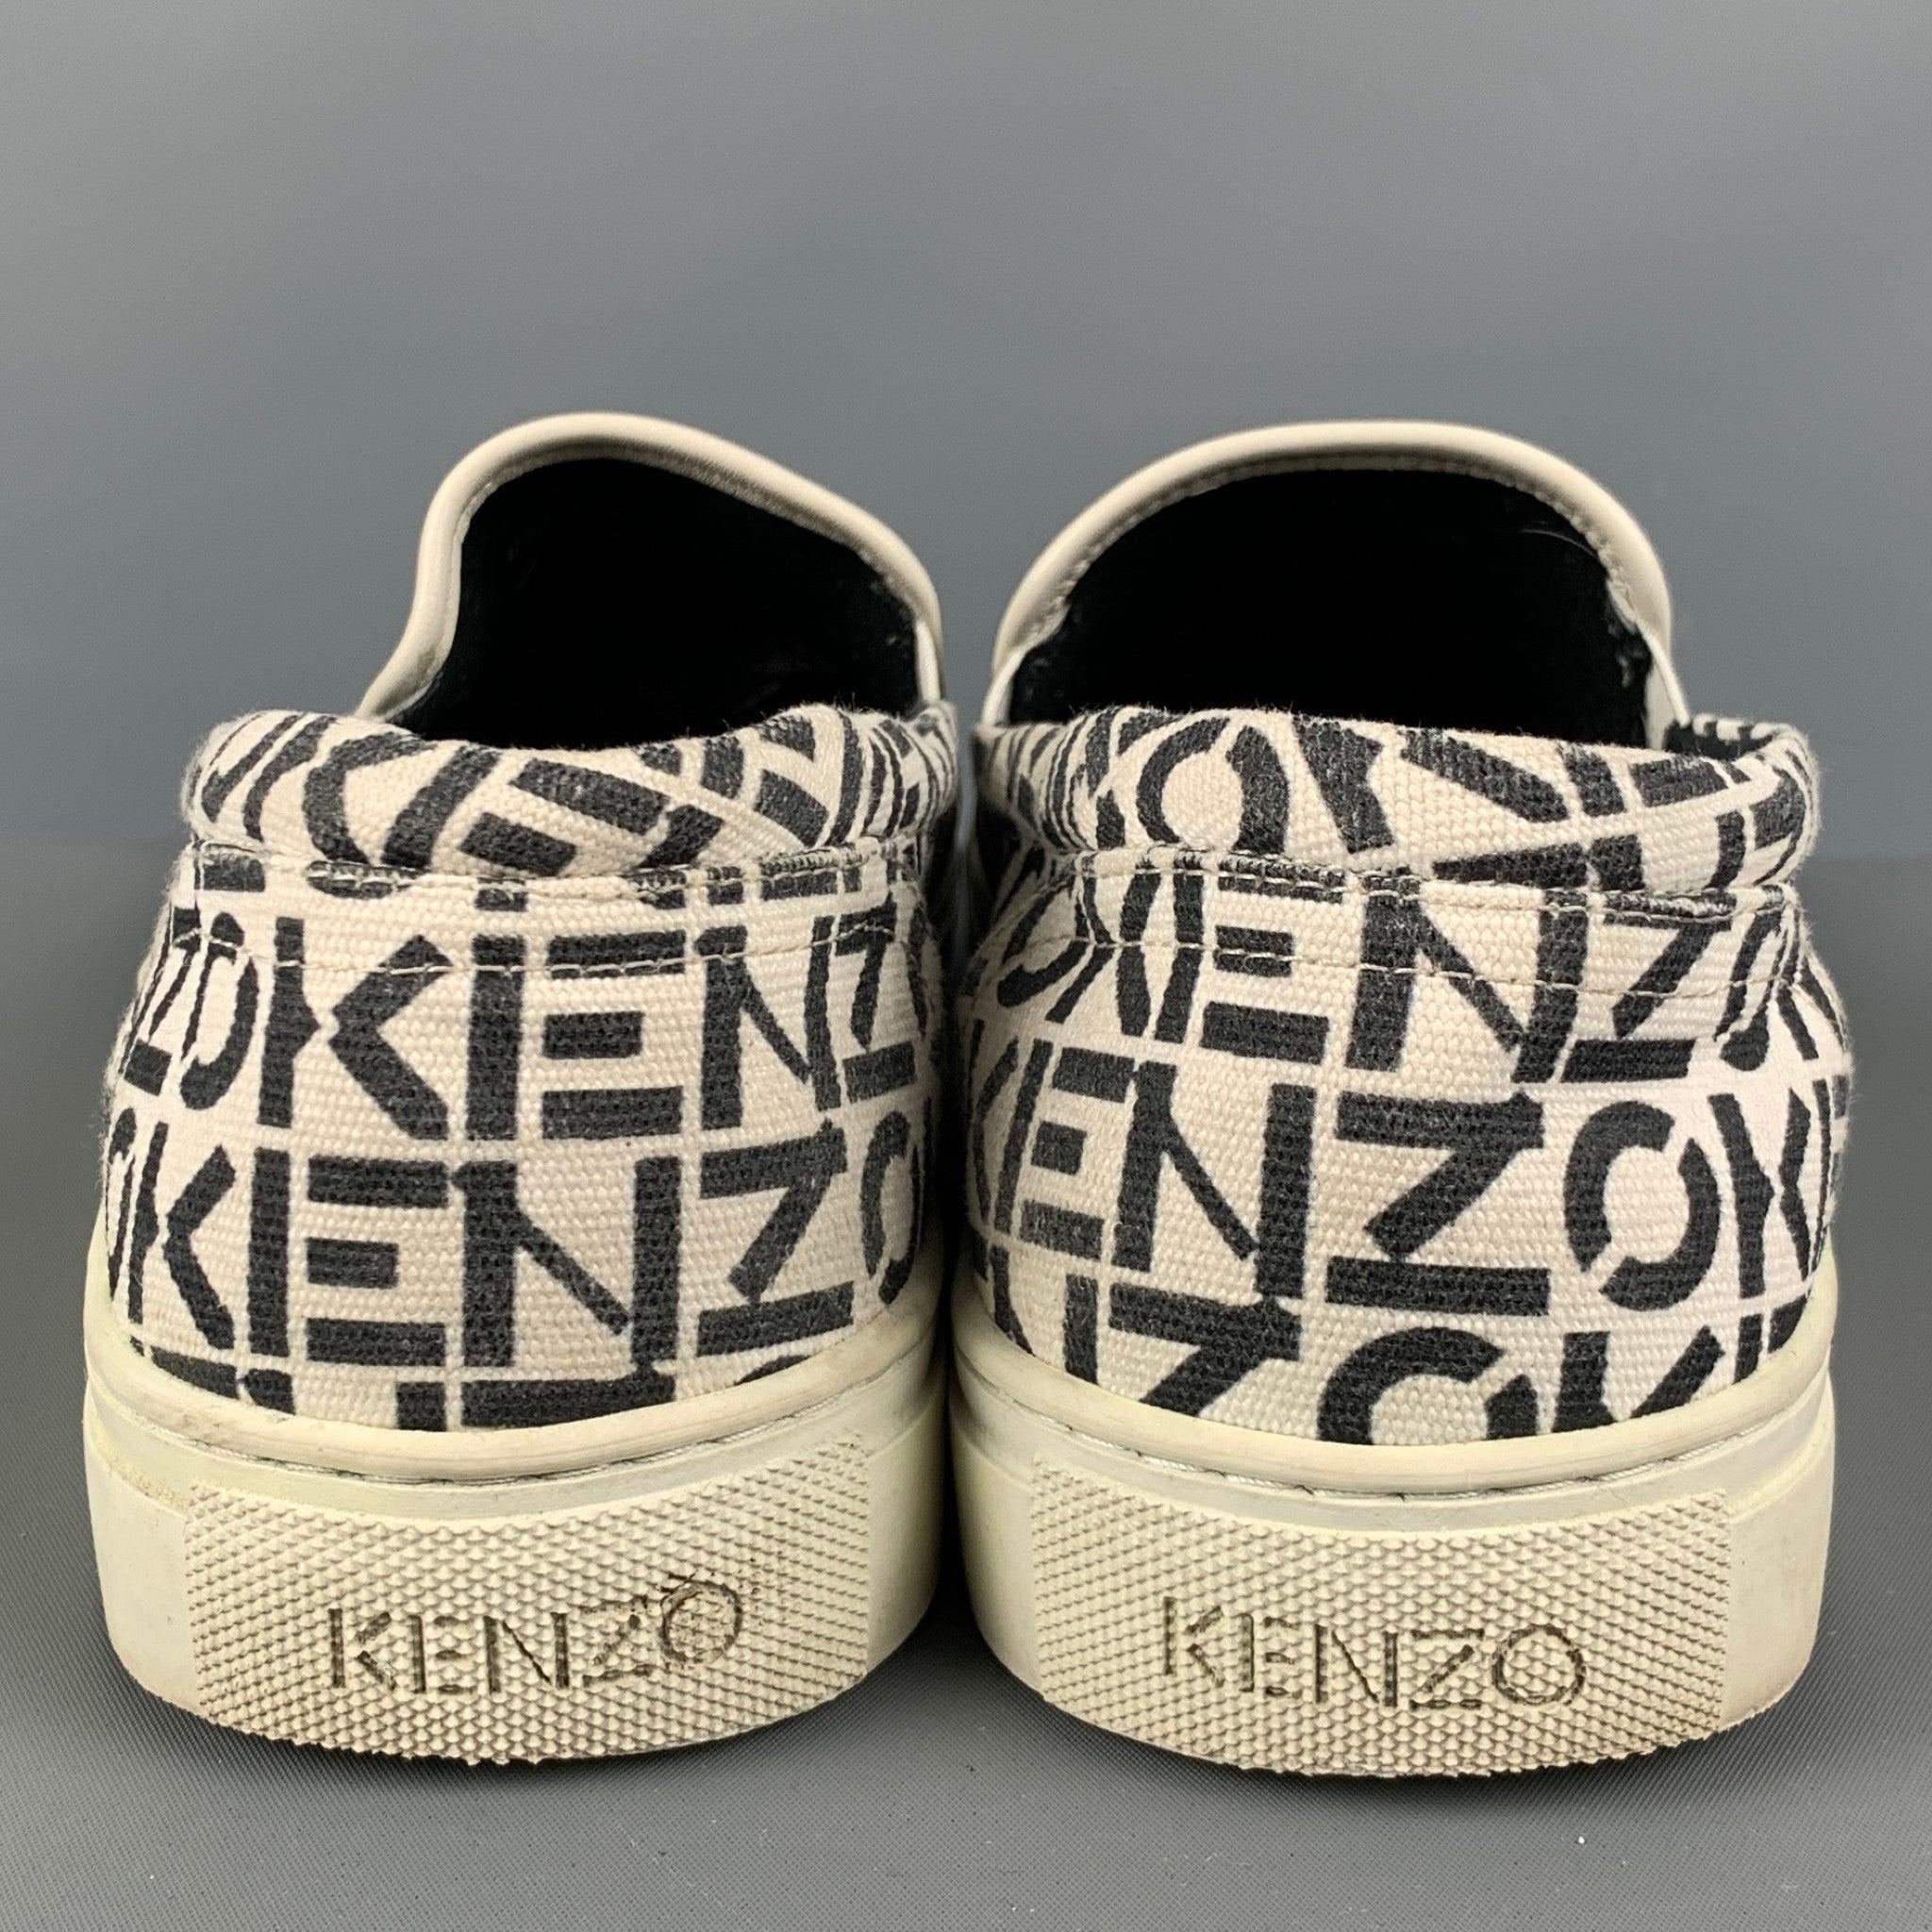 KENZO Size 10 White Black Logo Canvas Slip On Sneakers In Good Condition For Sale In San Francisco, CA